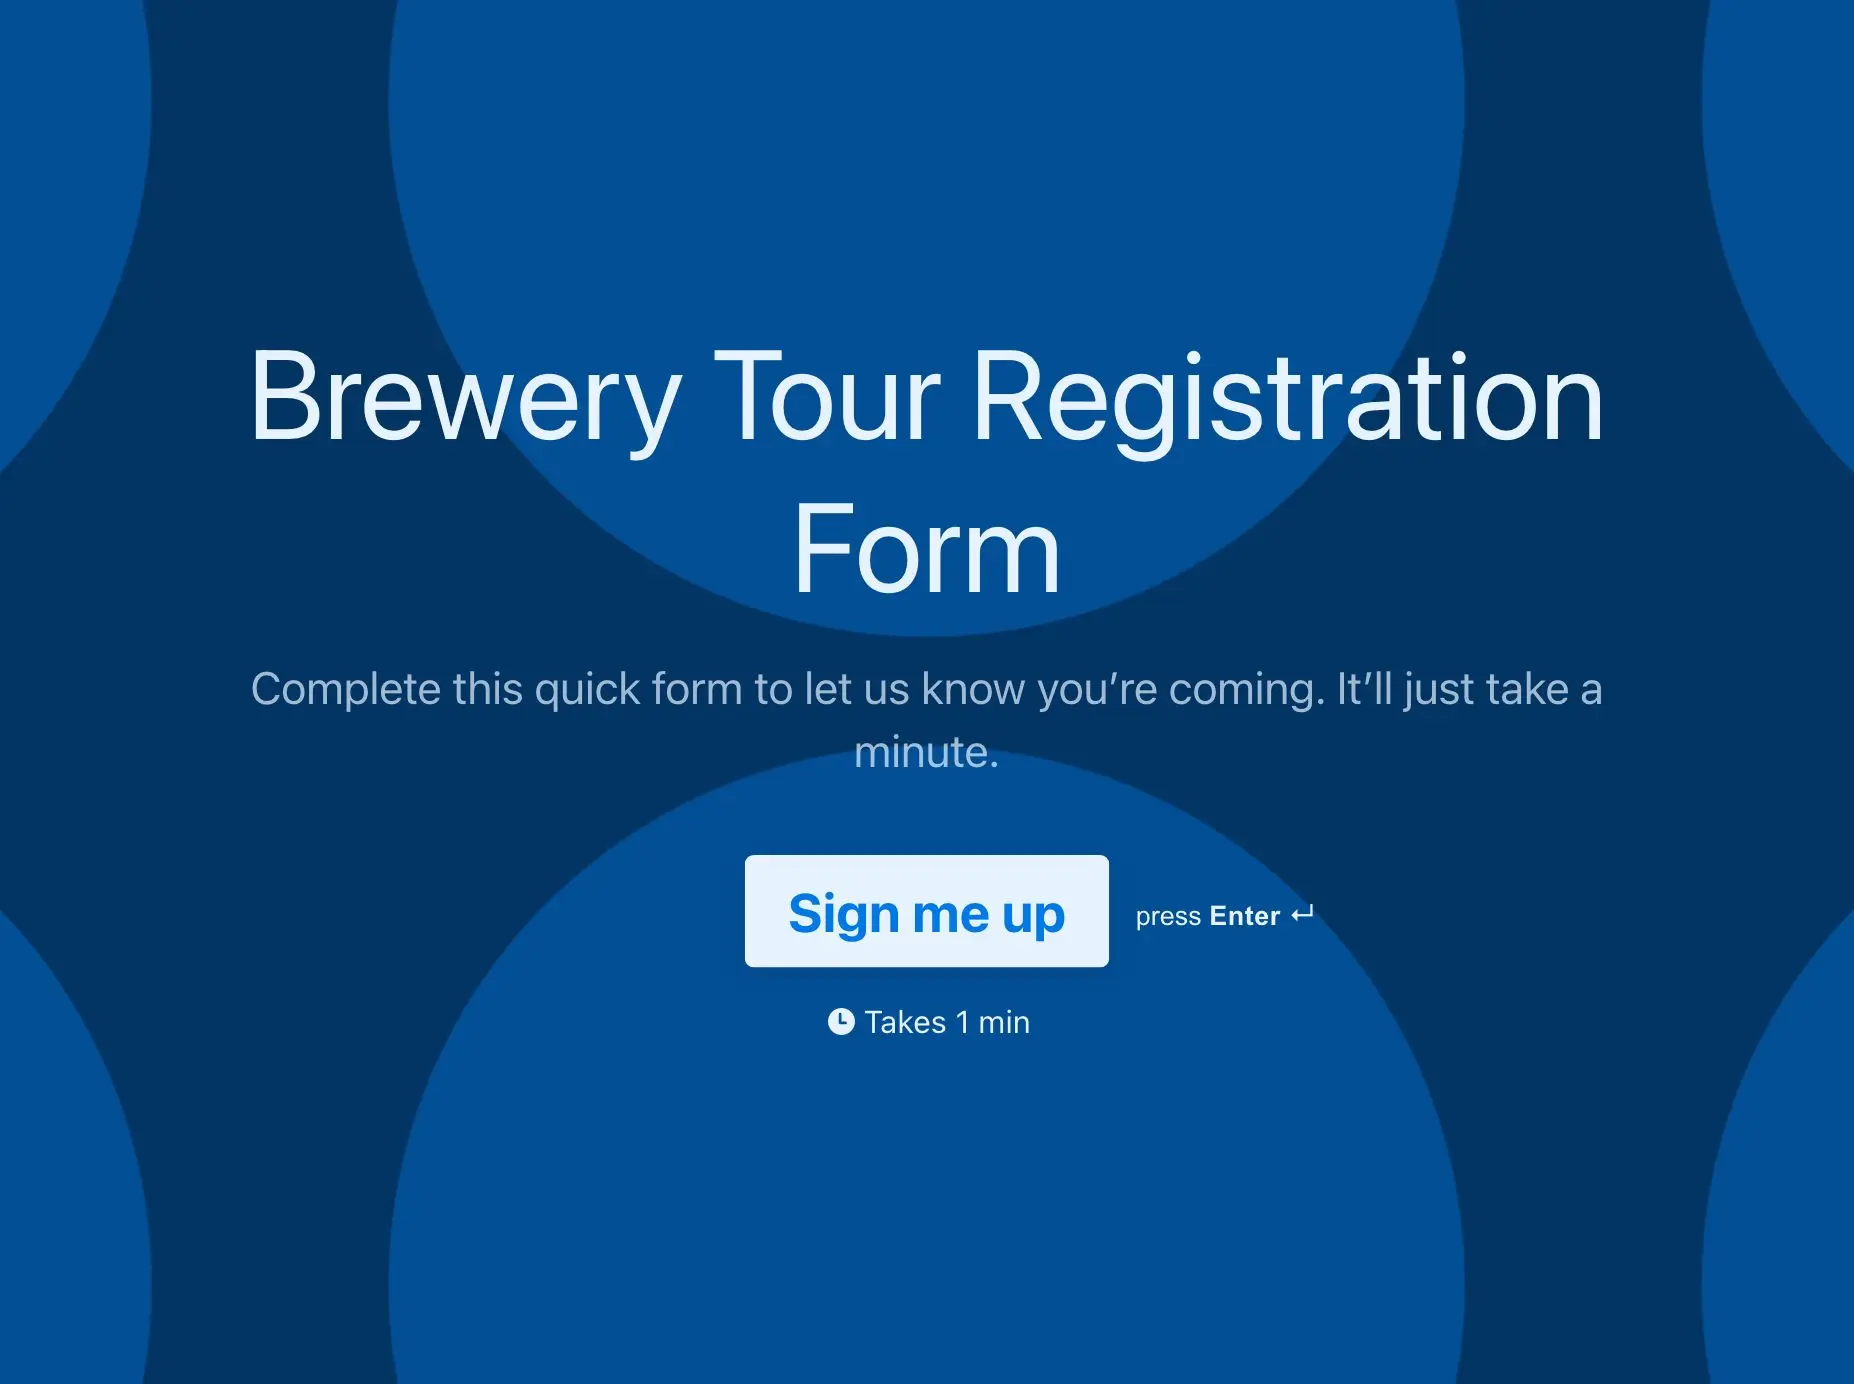 Brewery Tour Registration Form Template Hero